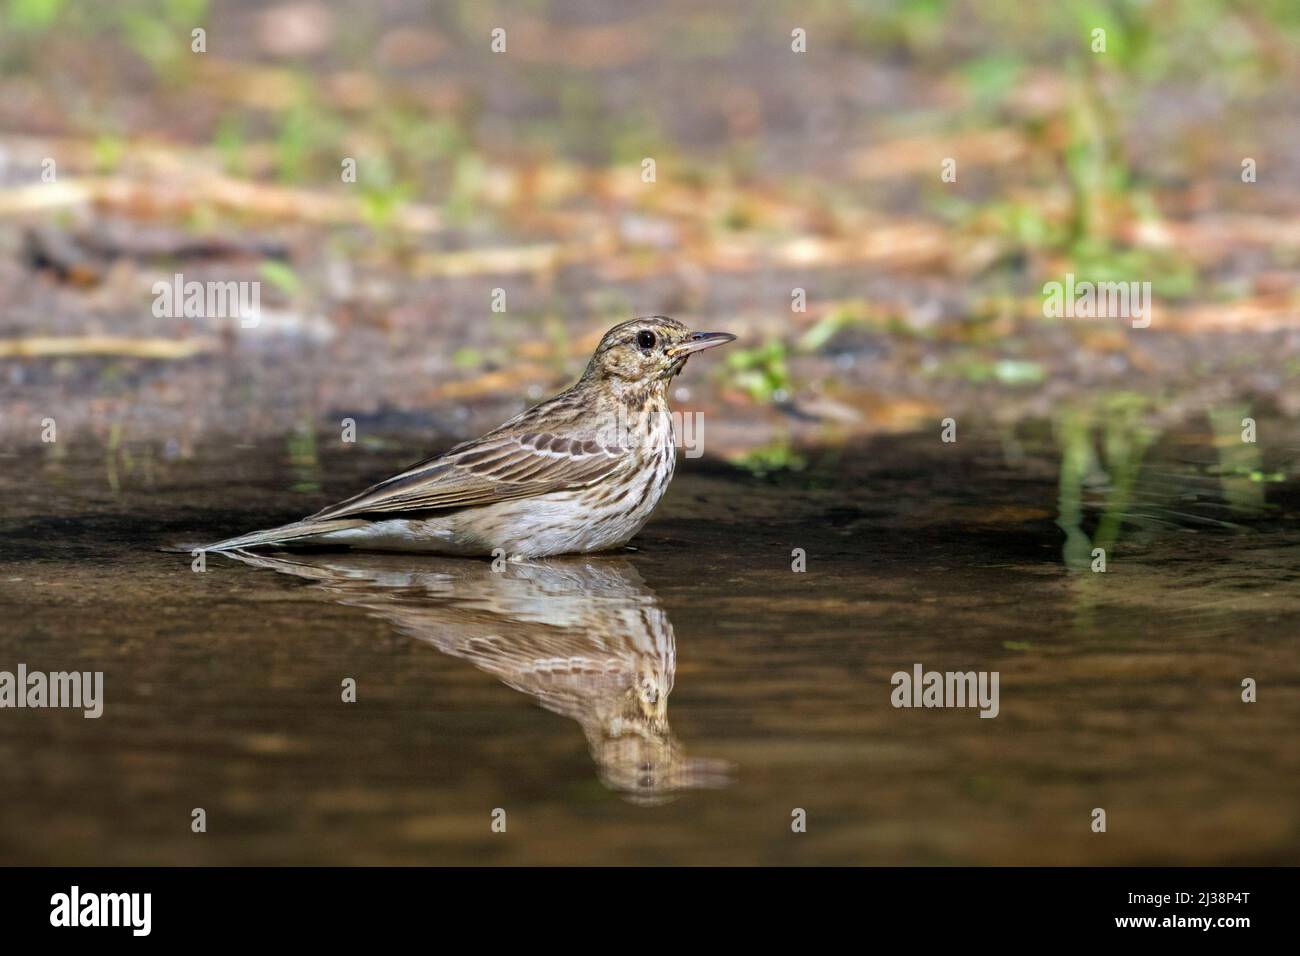 Tree pipit (Anthus trivialis) bathing in water from pond / rivulet Stock Photo